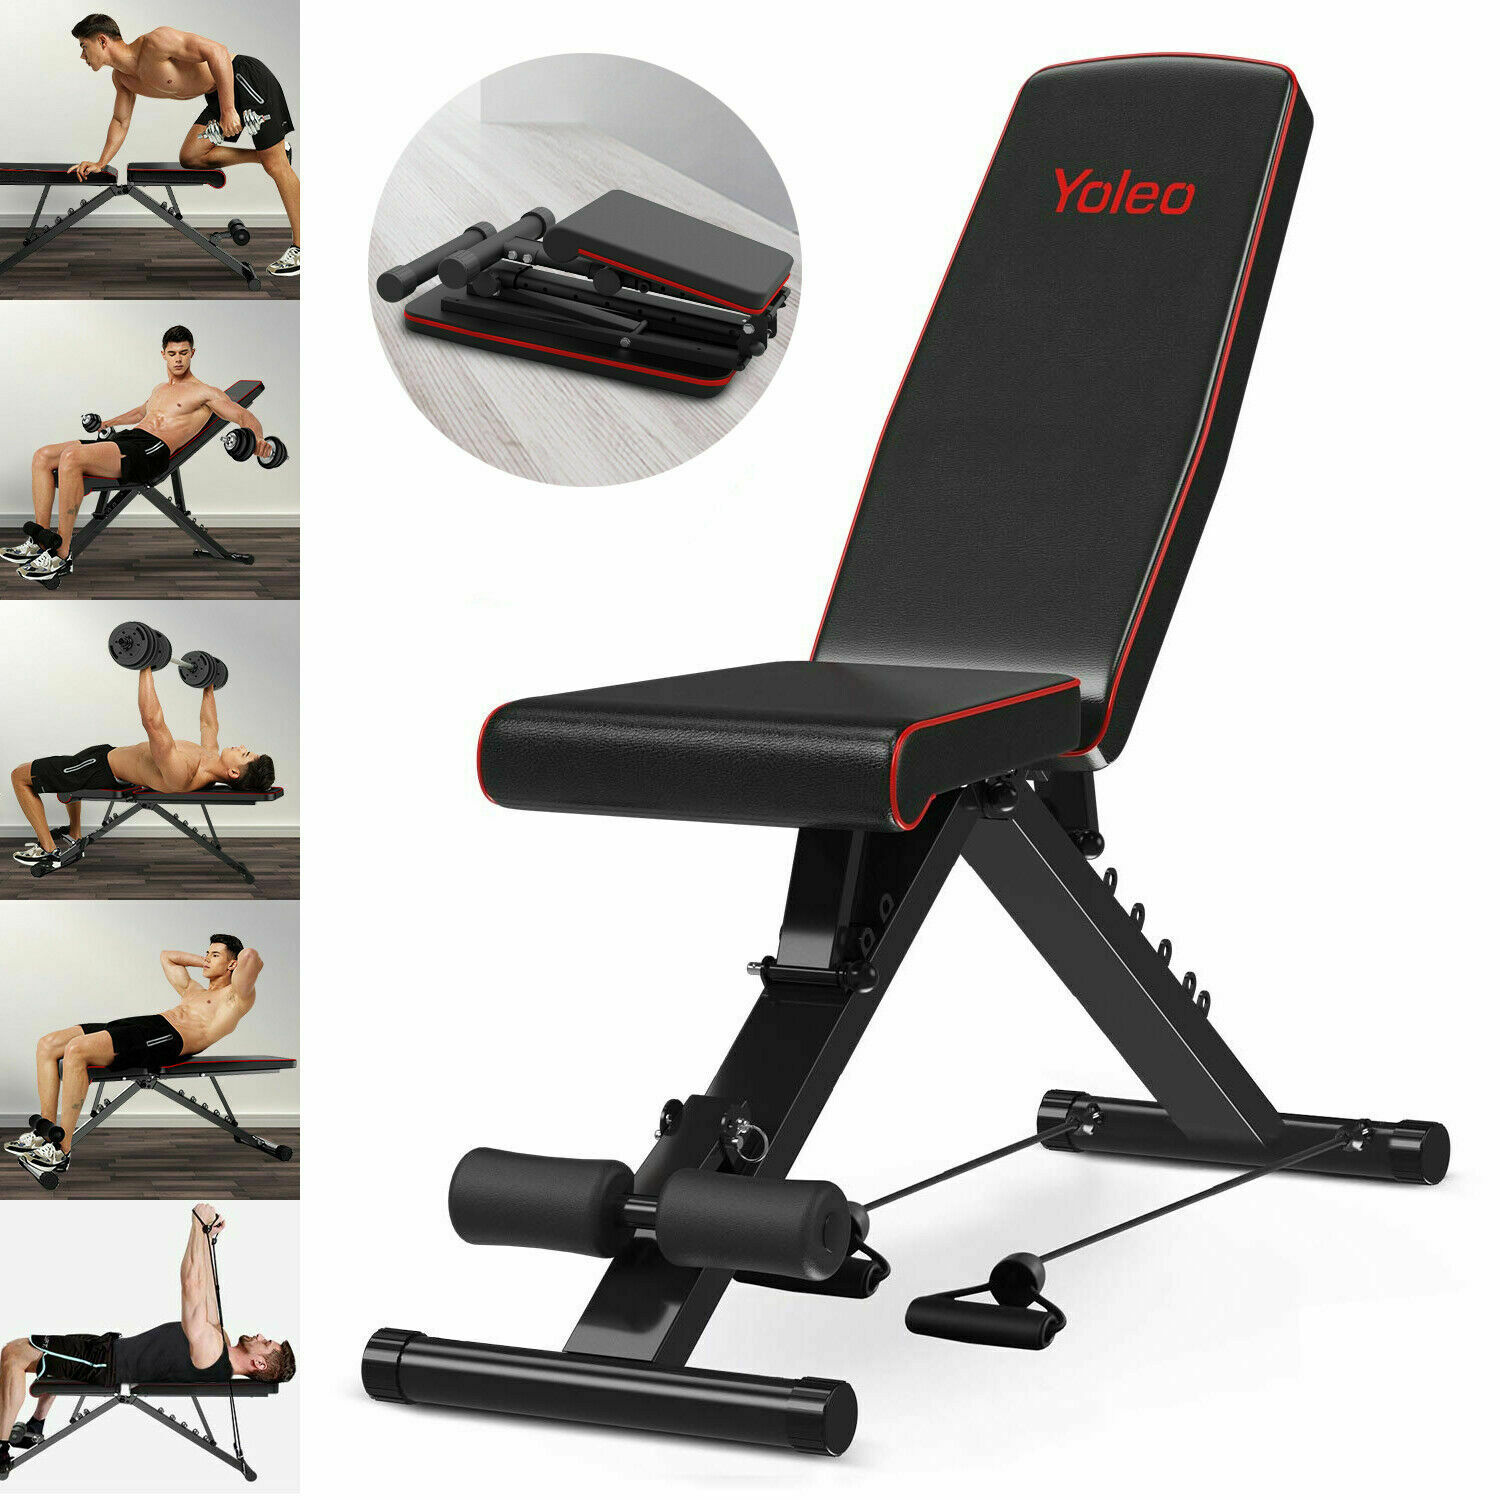 Training Weight Bench Adjustable Flat Incline&decline Workout Fitness Exercise